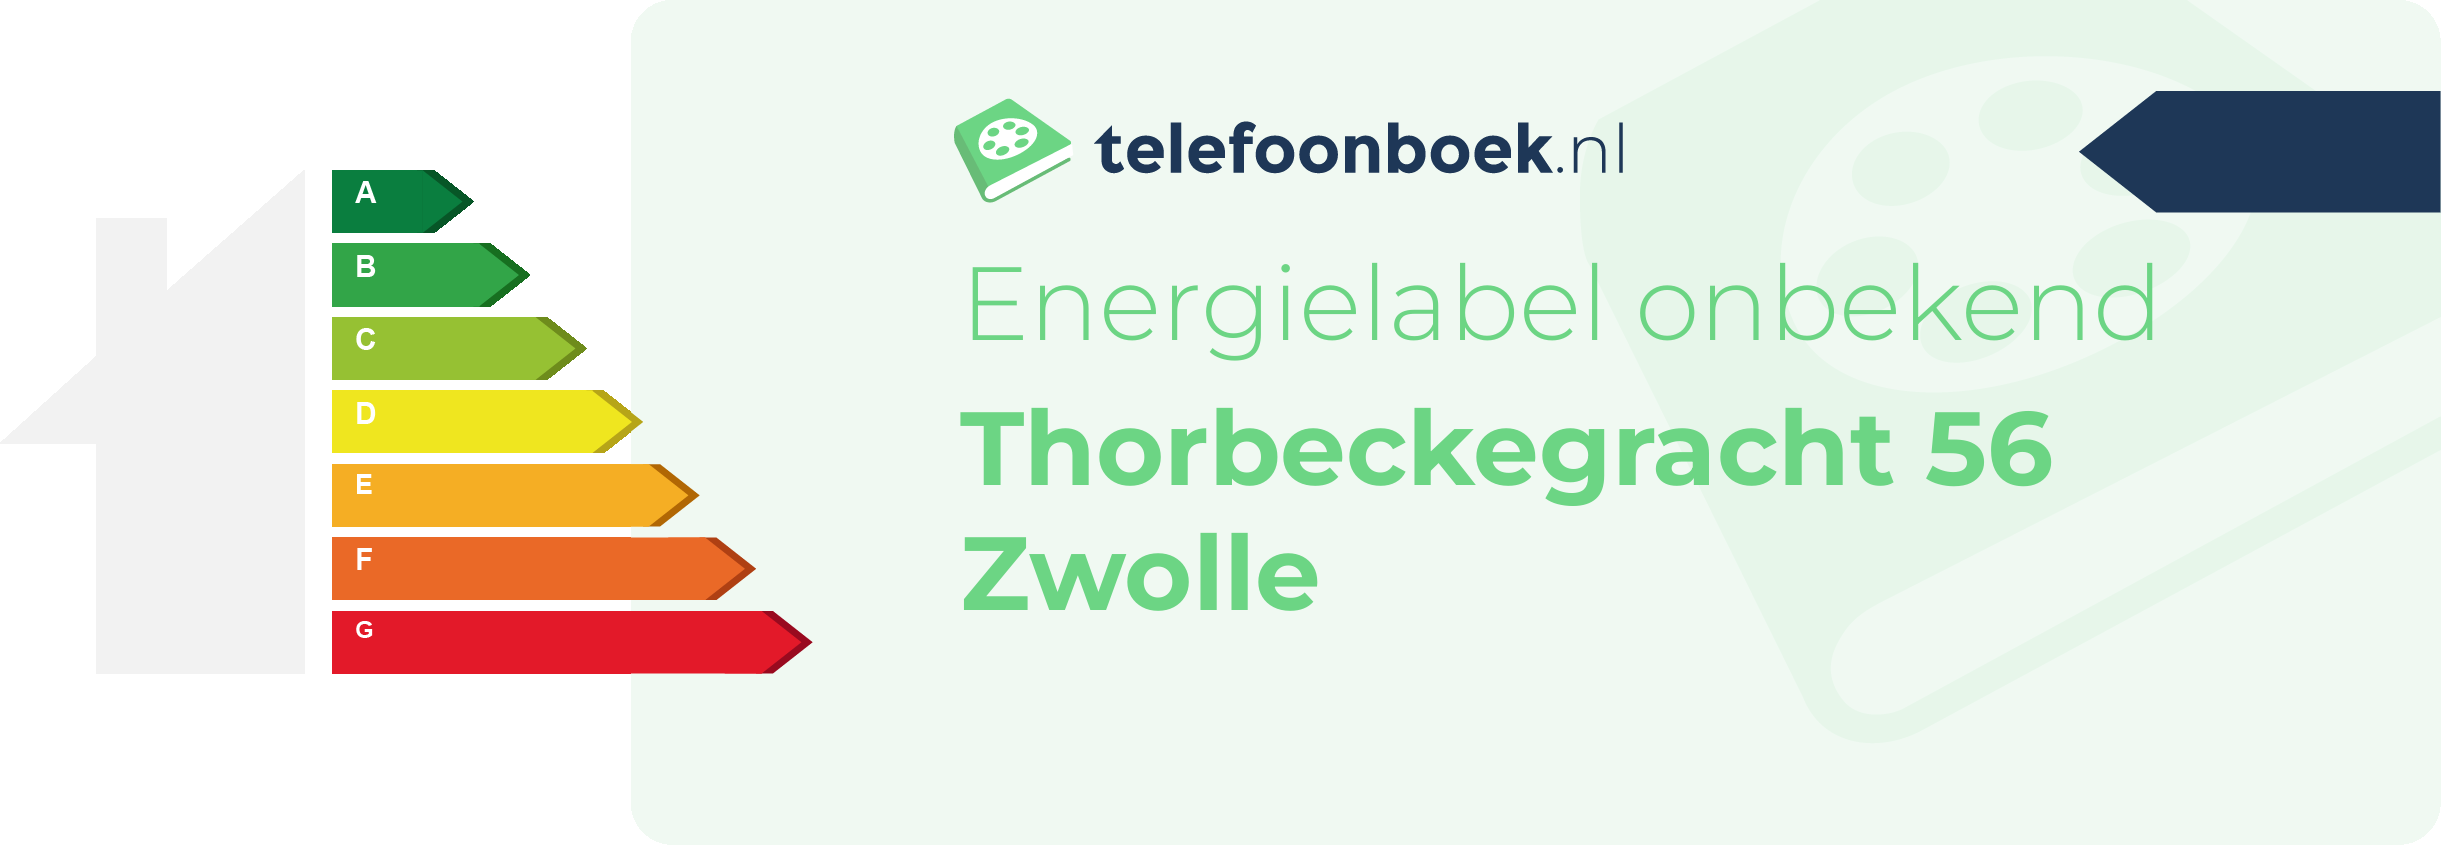 Energielabel Thorbeckegracht 56 Zwolle